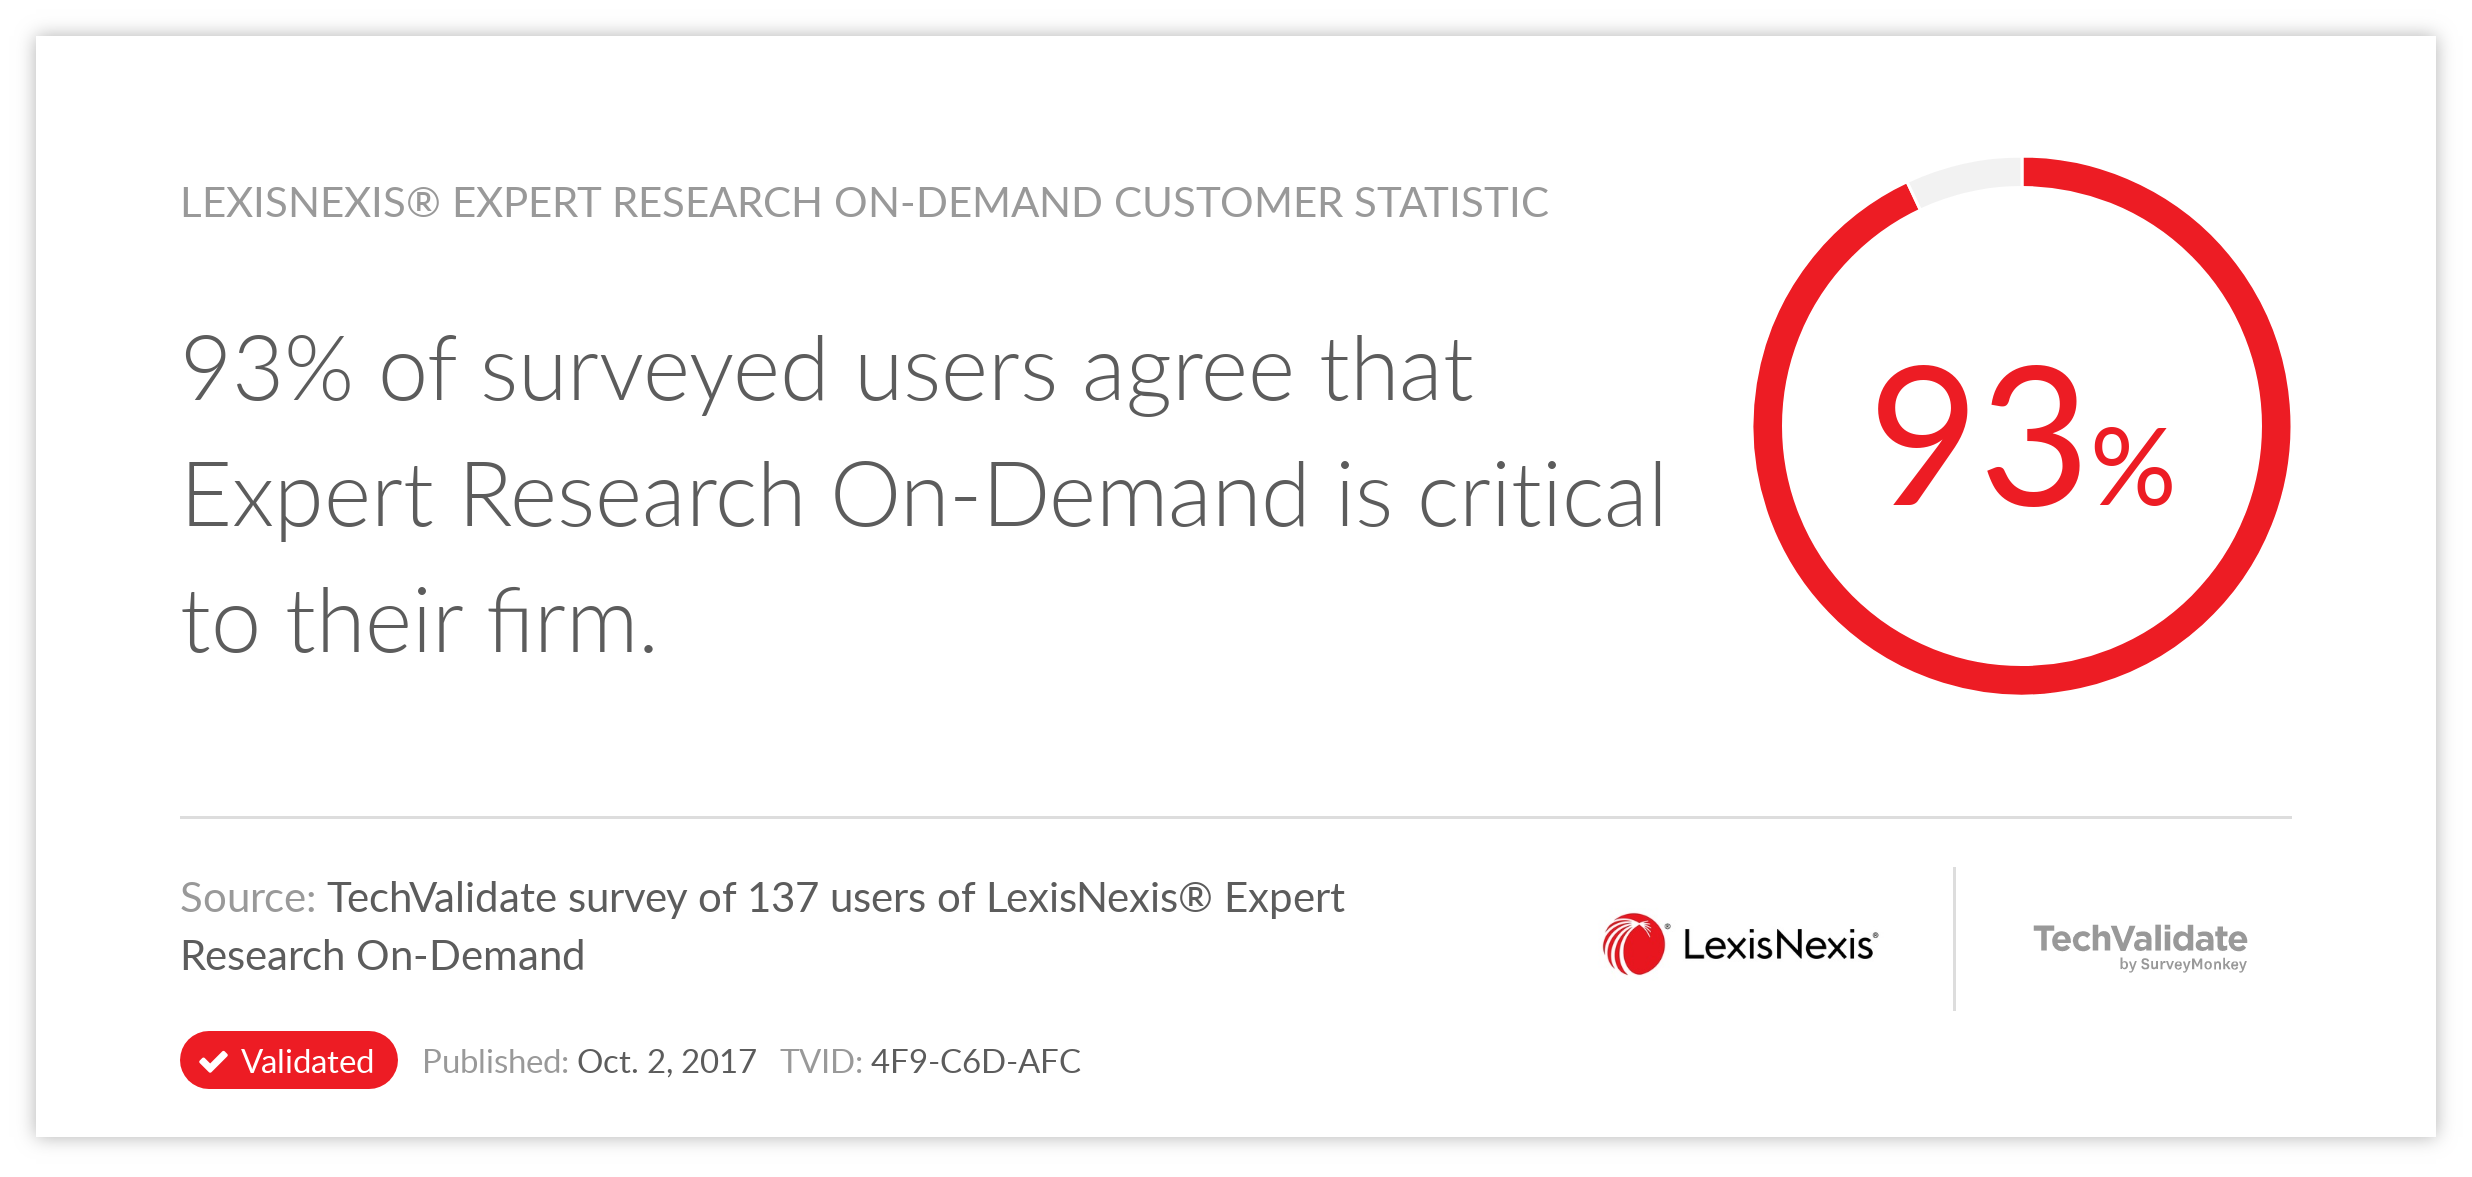 LexisNexis® Expert Research On-Demand Customer Statistic